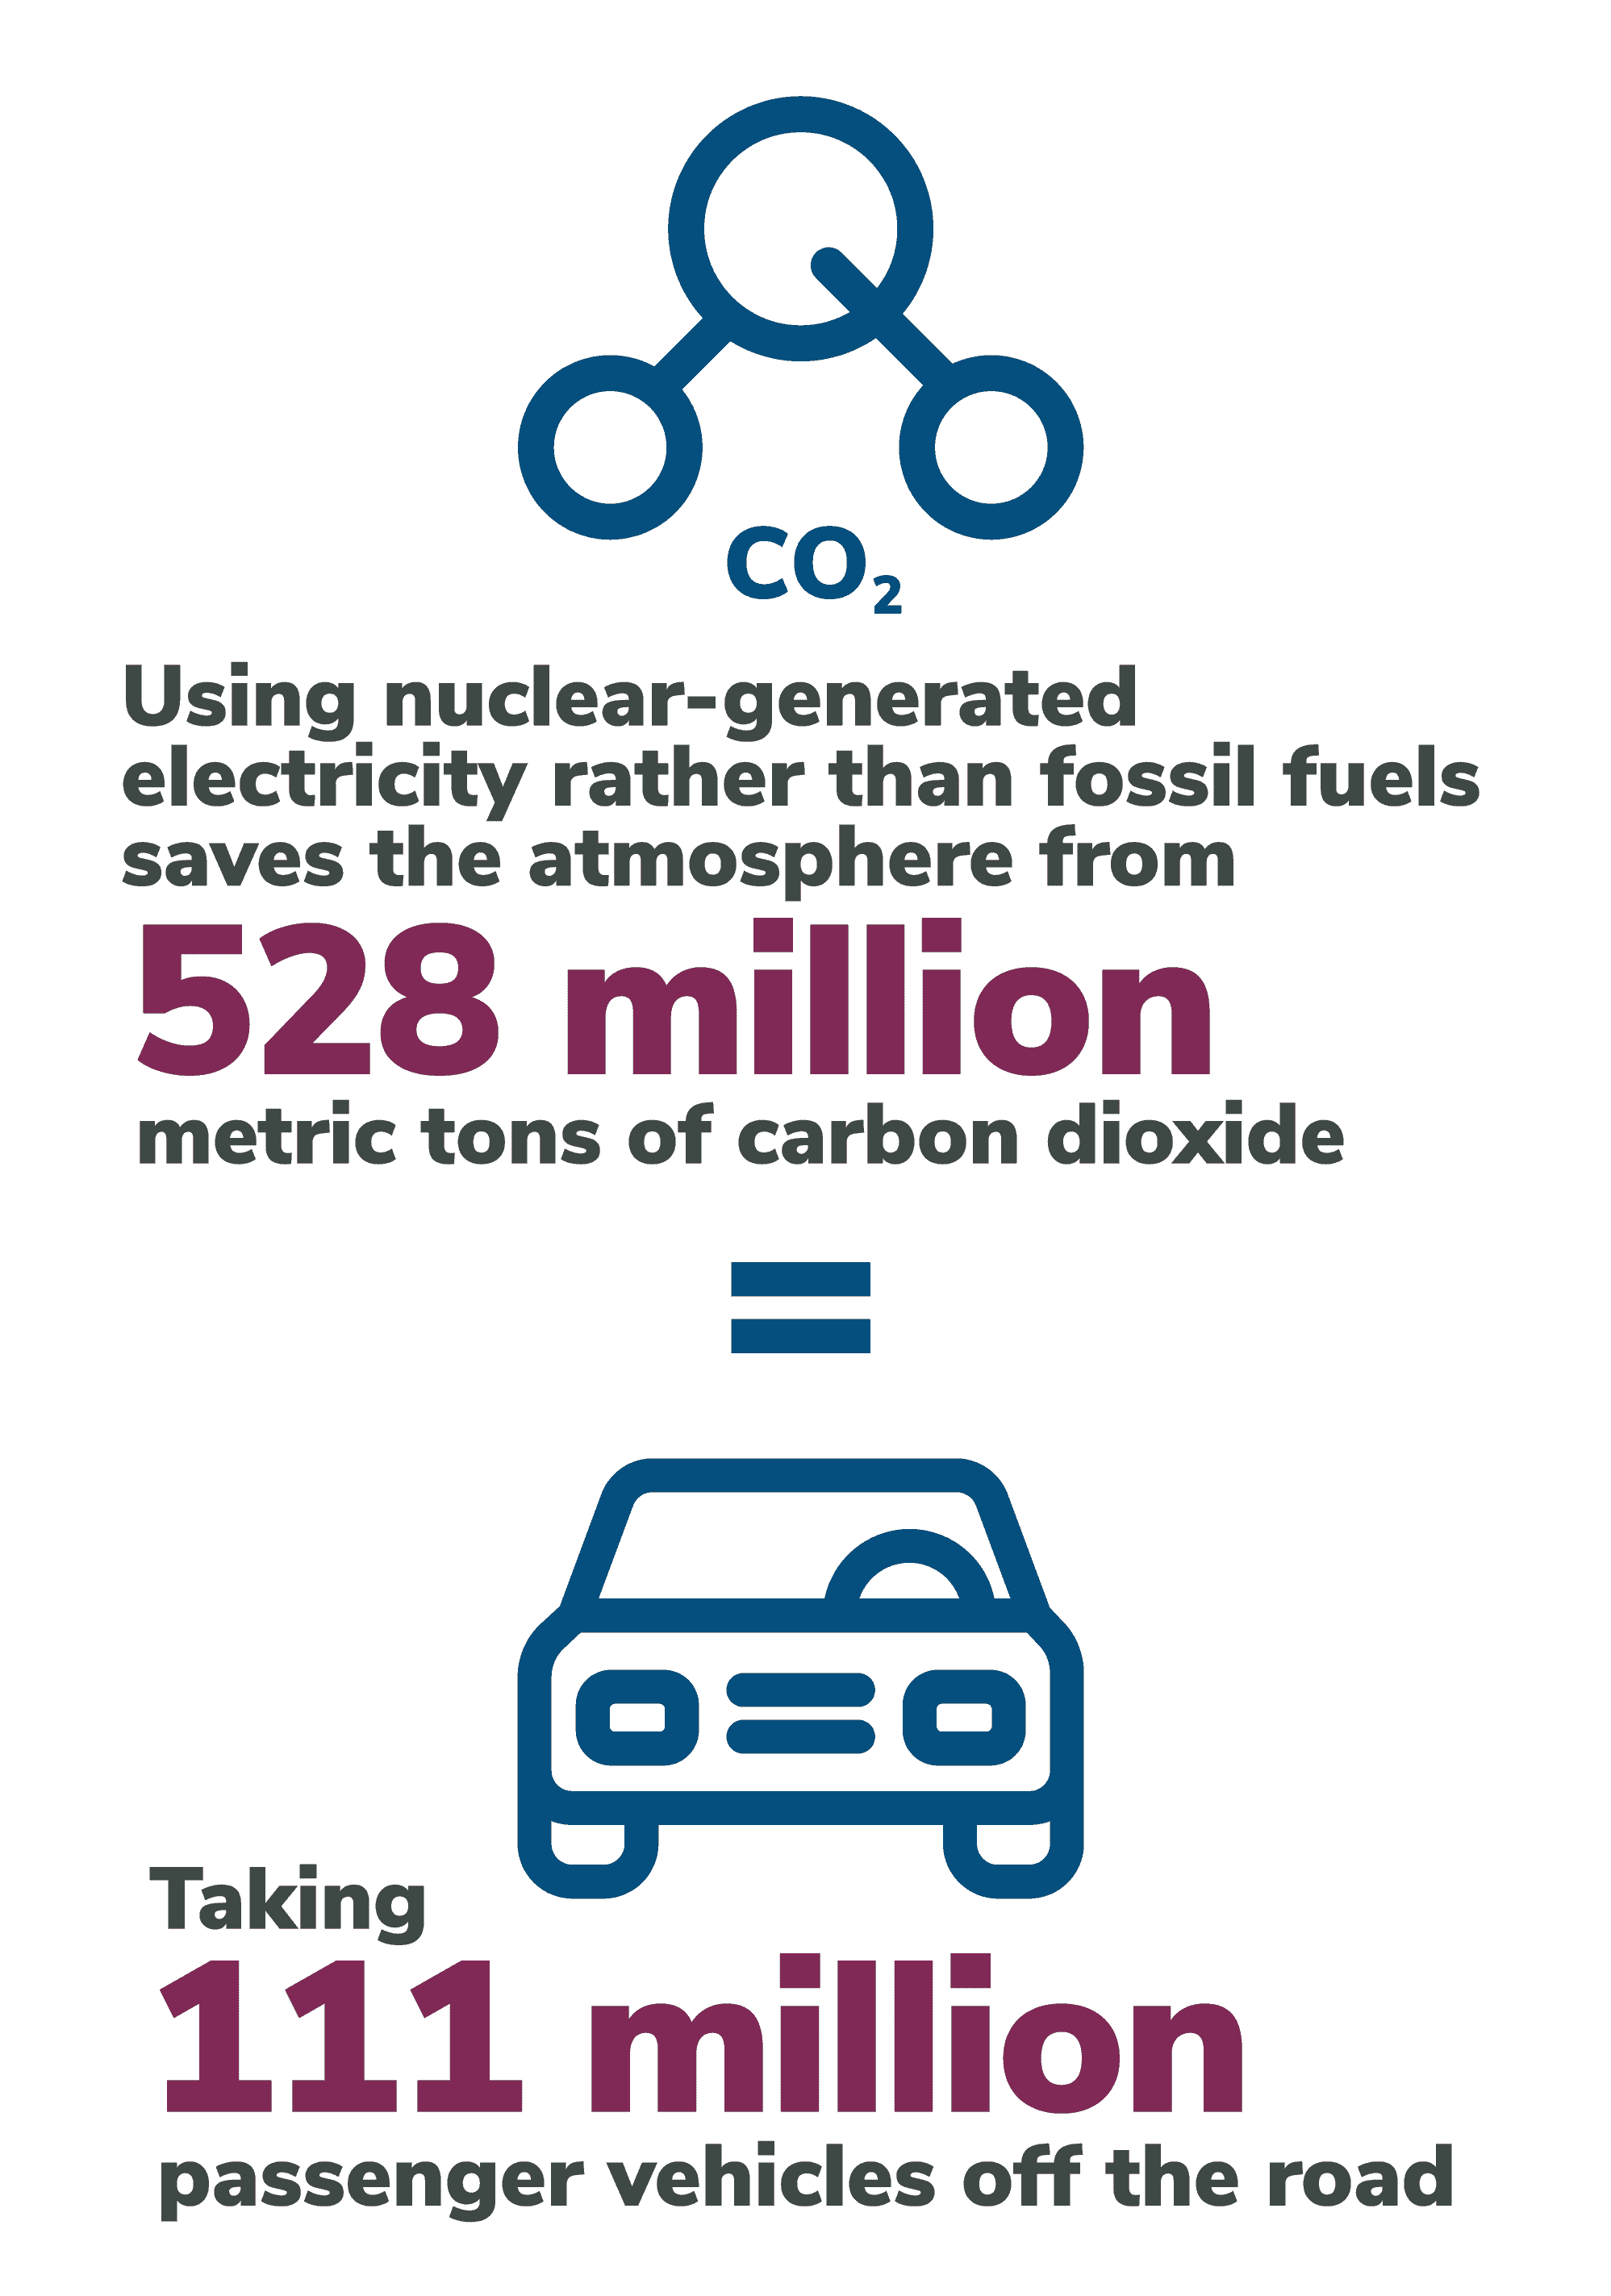 Using nuclear-generated electricity rather than fossil fuels saves the atmosphere from 528 million metric tons of carbon dioxide which equals taking 111 million passenger vehicles off of the road